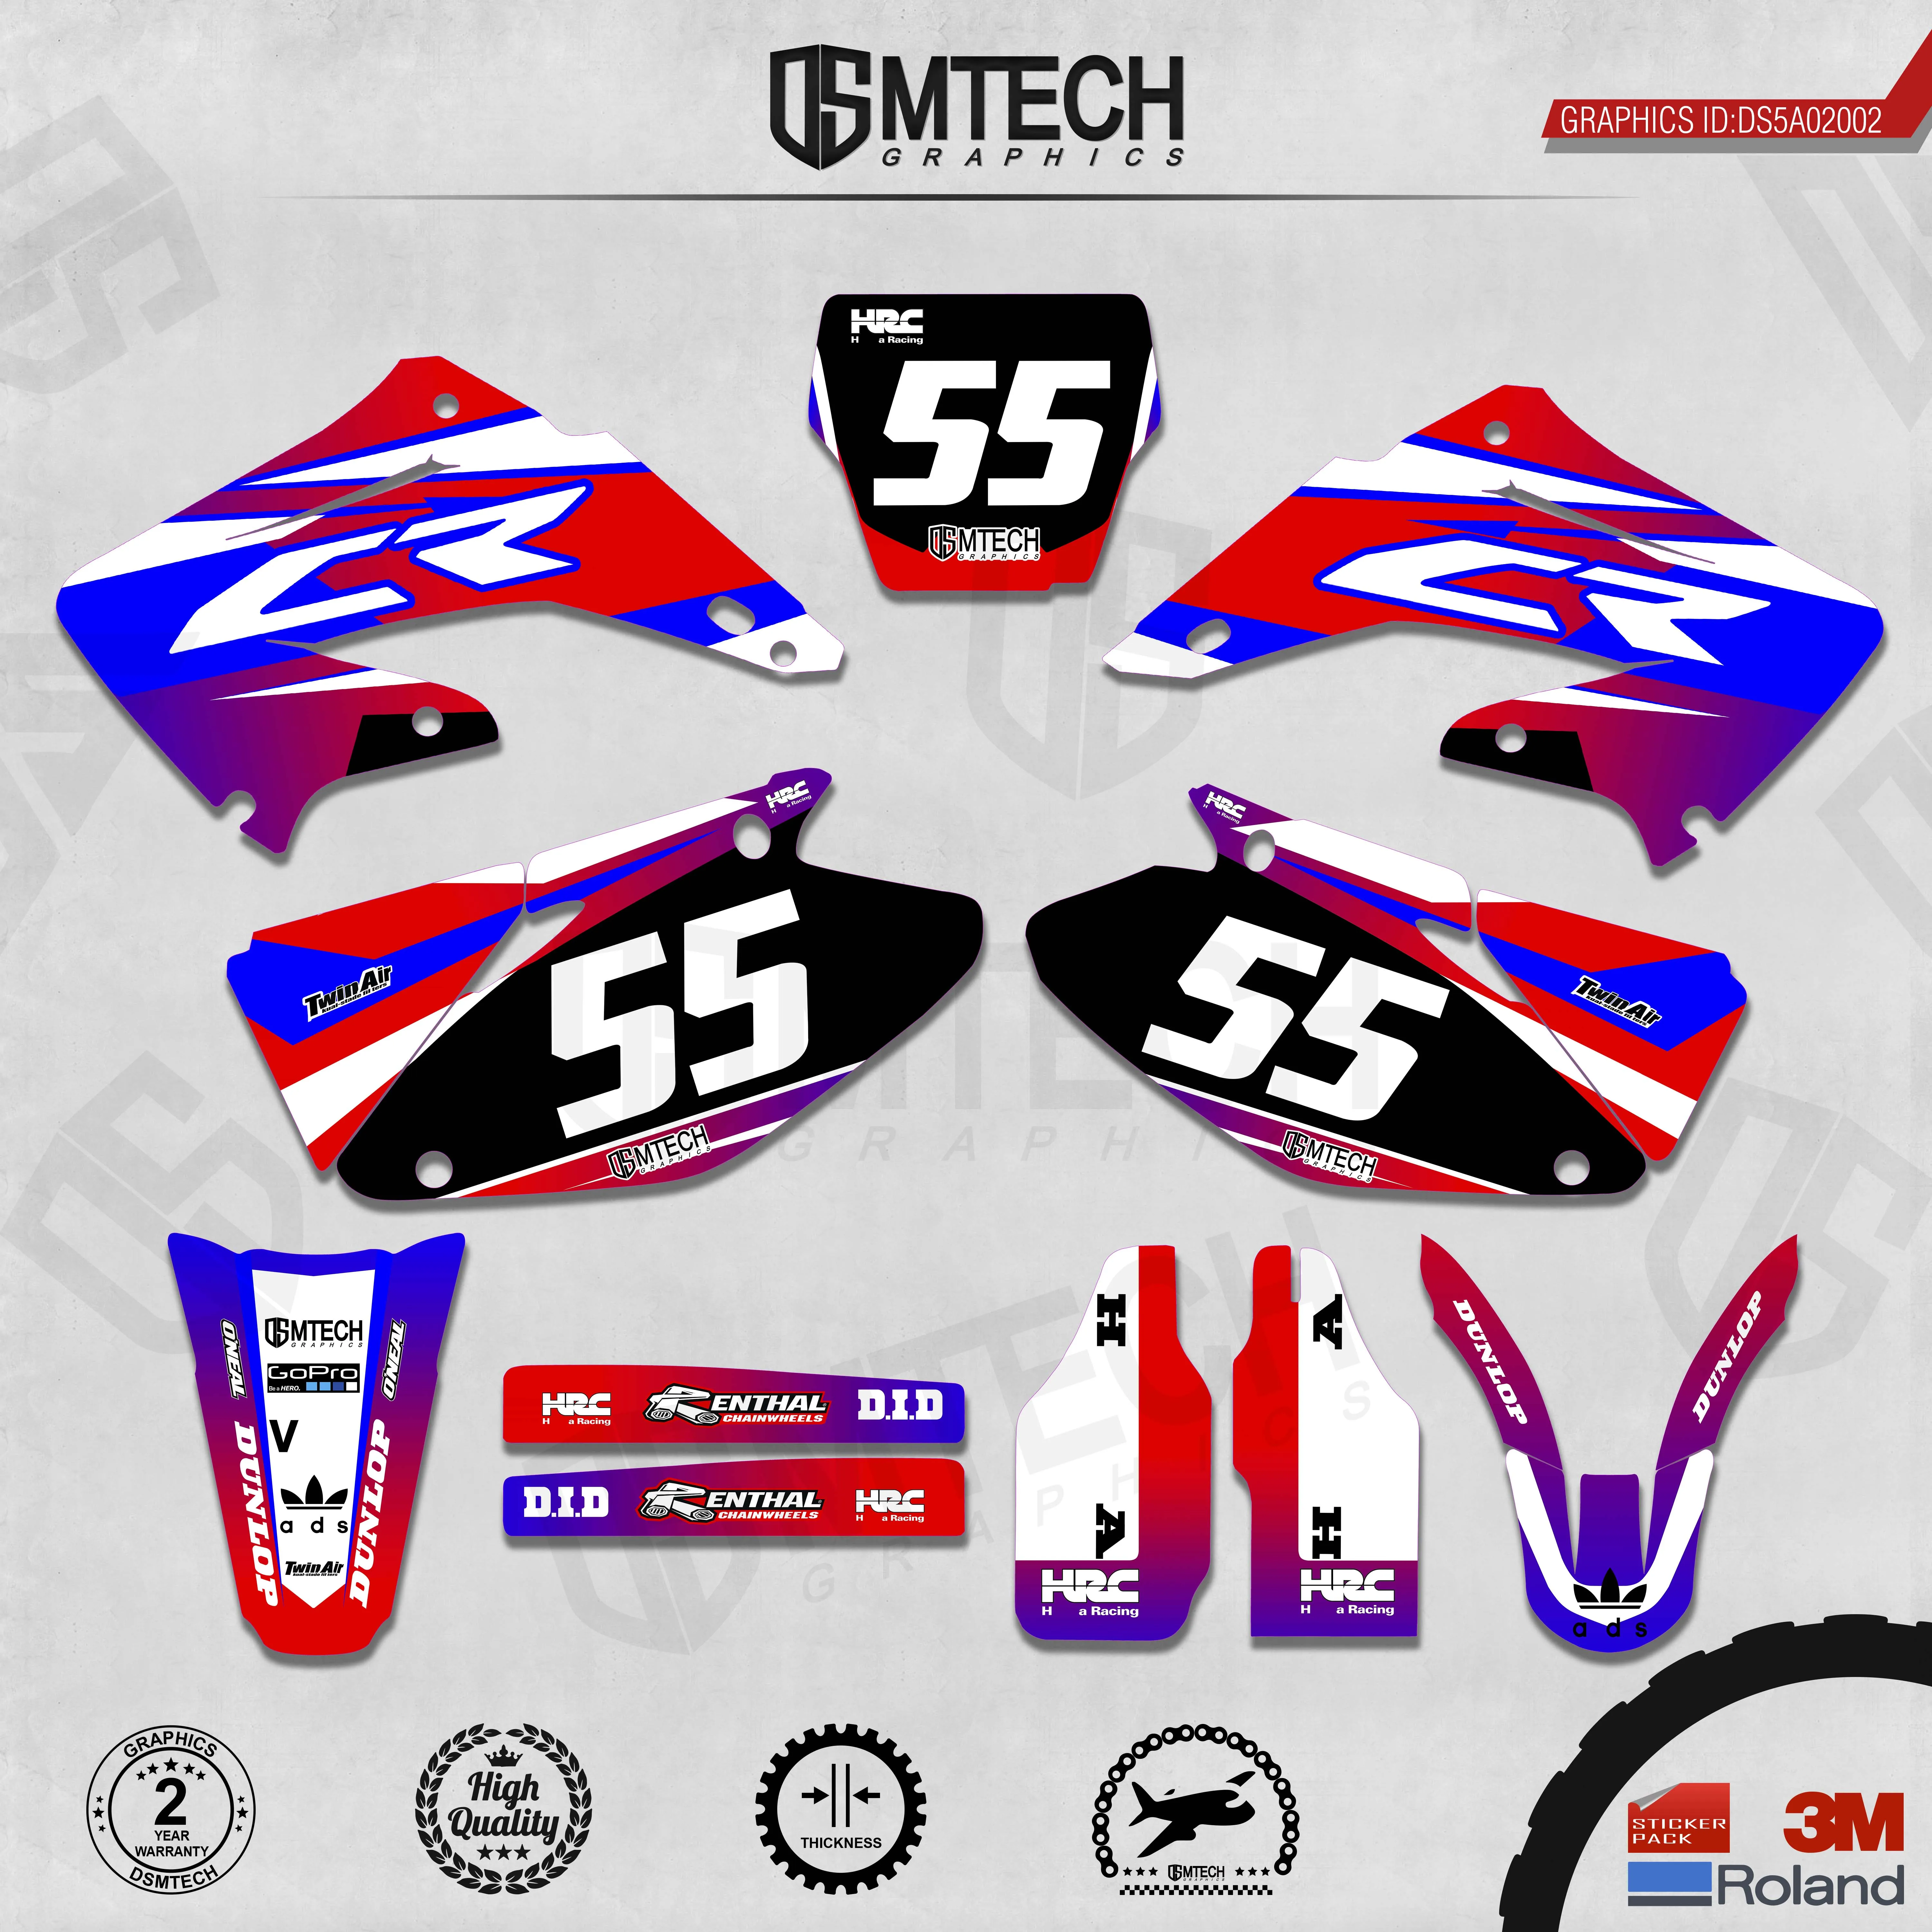 DSMTECH Customized Team Graphics Backgrounds Decals 3M Custom Stickers For 2002-2004 2005-2007 2008-2010 2011-2012 CR125-250 002 dsmtech graphics stickers decals kits for honda 2002 2003 2004 2005 2006 2007 2008 2009 2010 2012 cr125 cr250